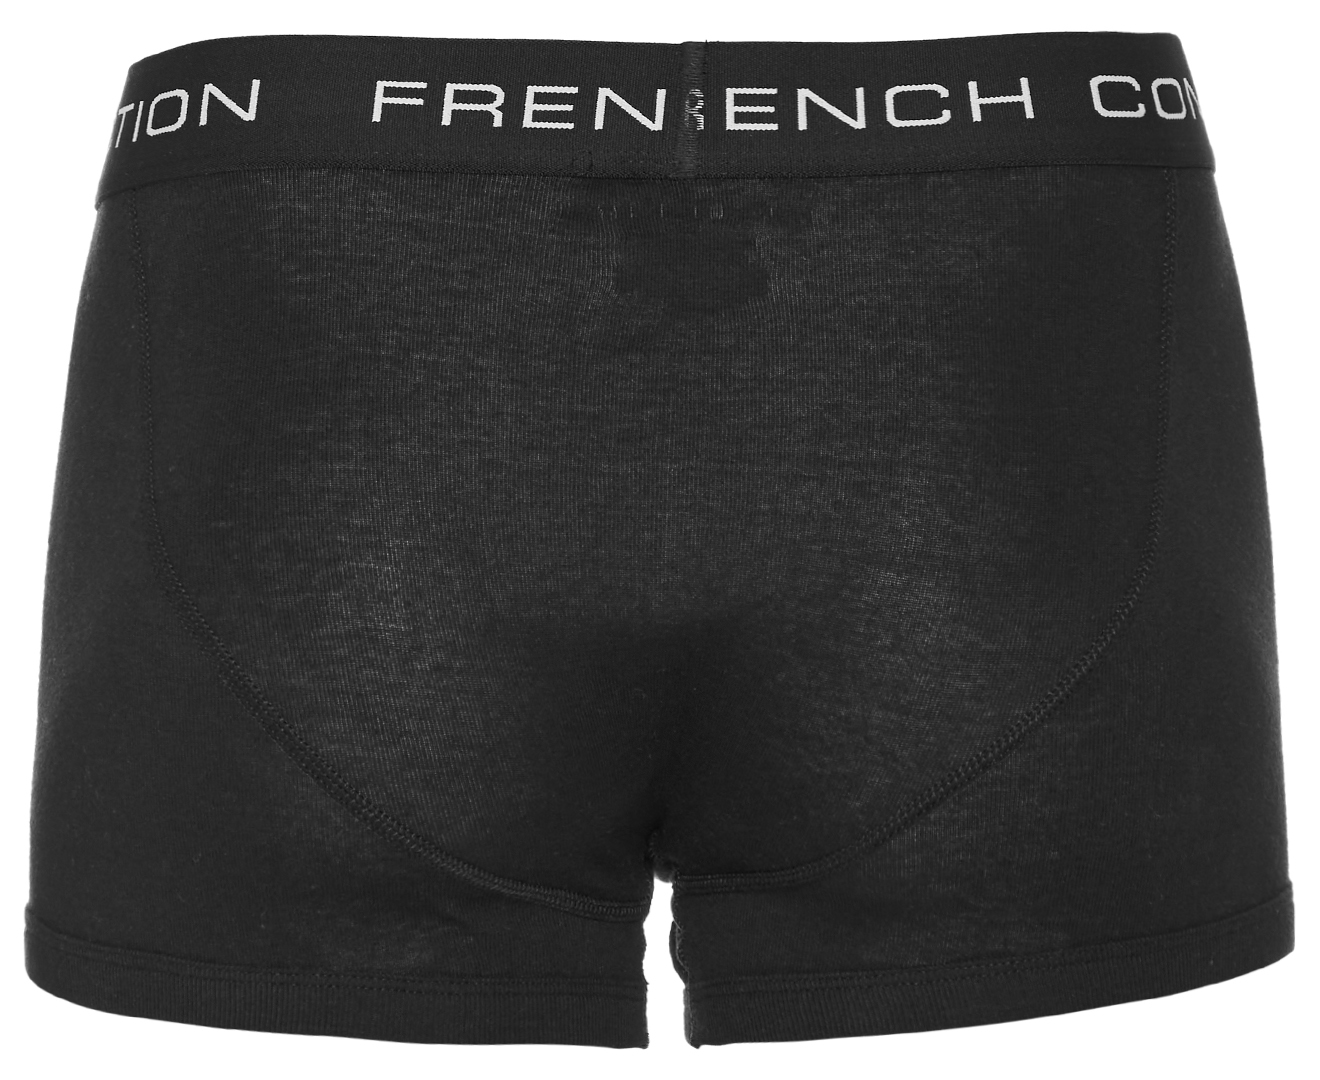 French Connection Men's Trunks 3-Pack - Anthracite Black | Catch.co.nz